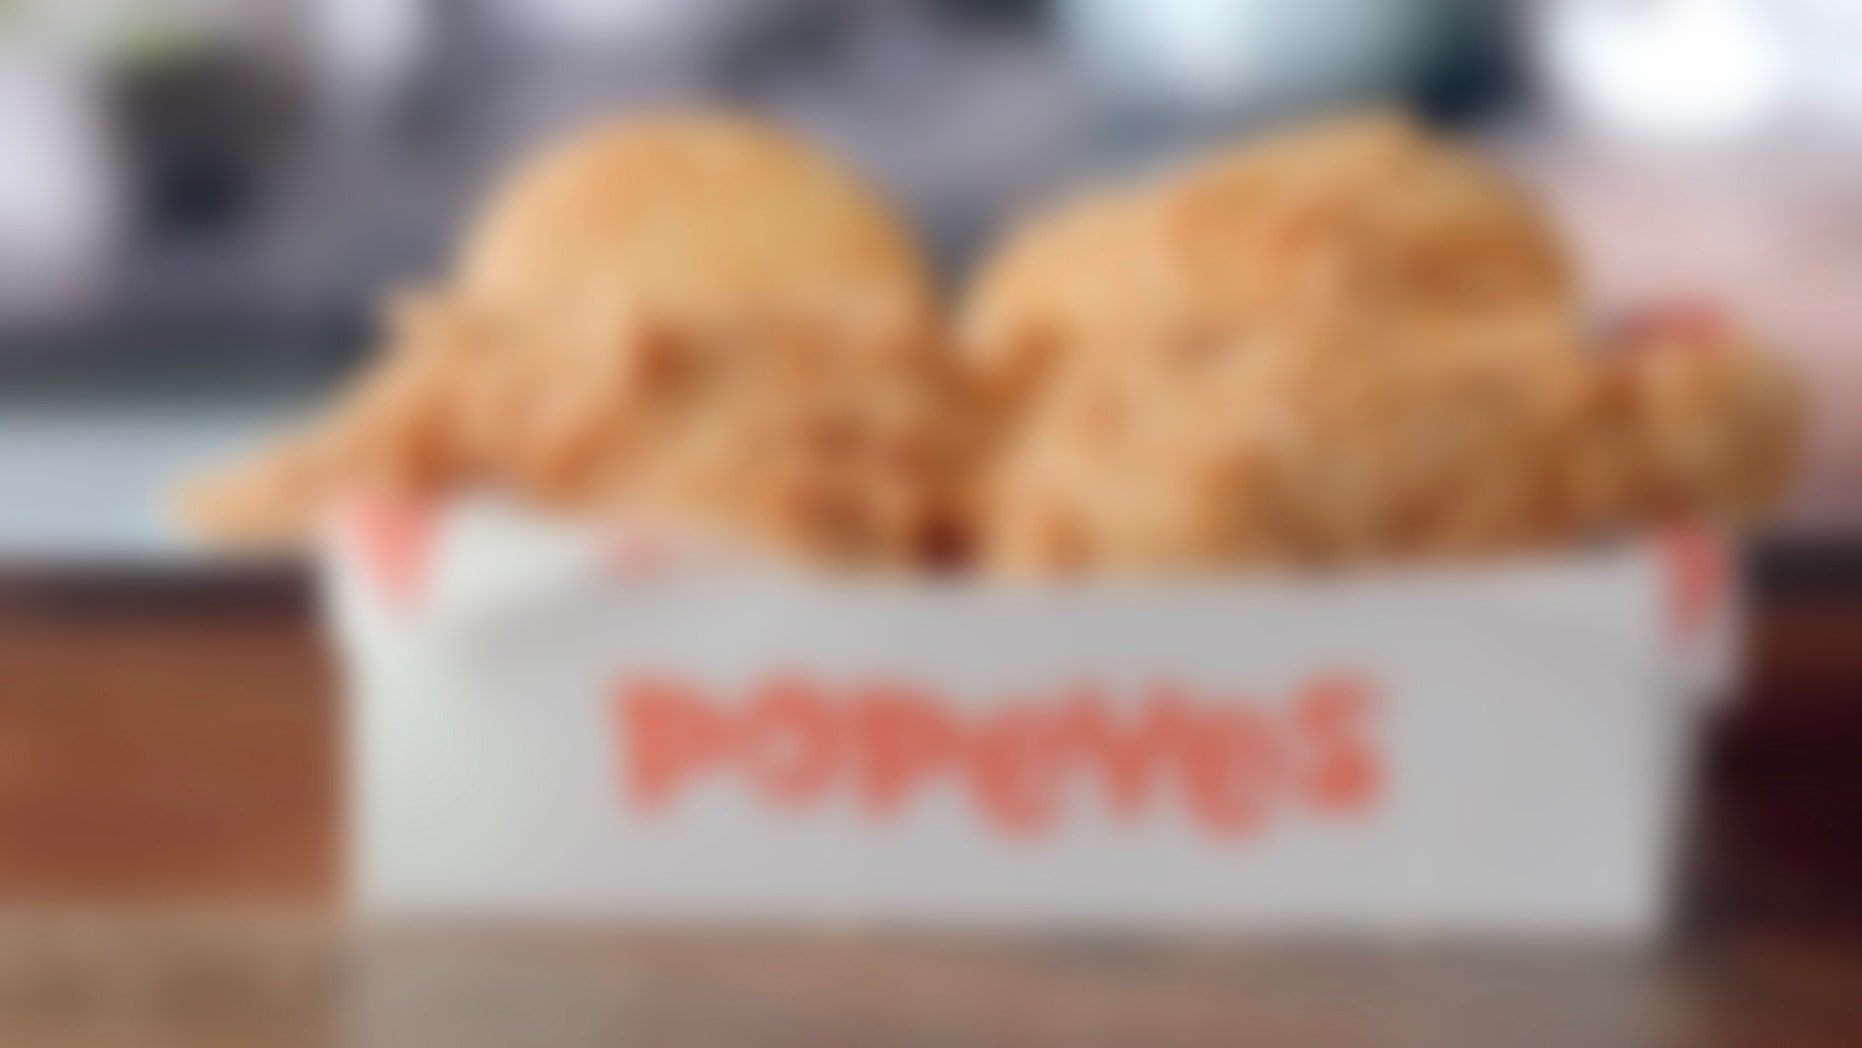 Popeyes defends New Orleans Saints with tweet trolling NFL referees over controversial no-call